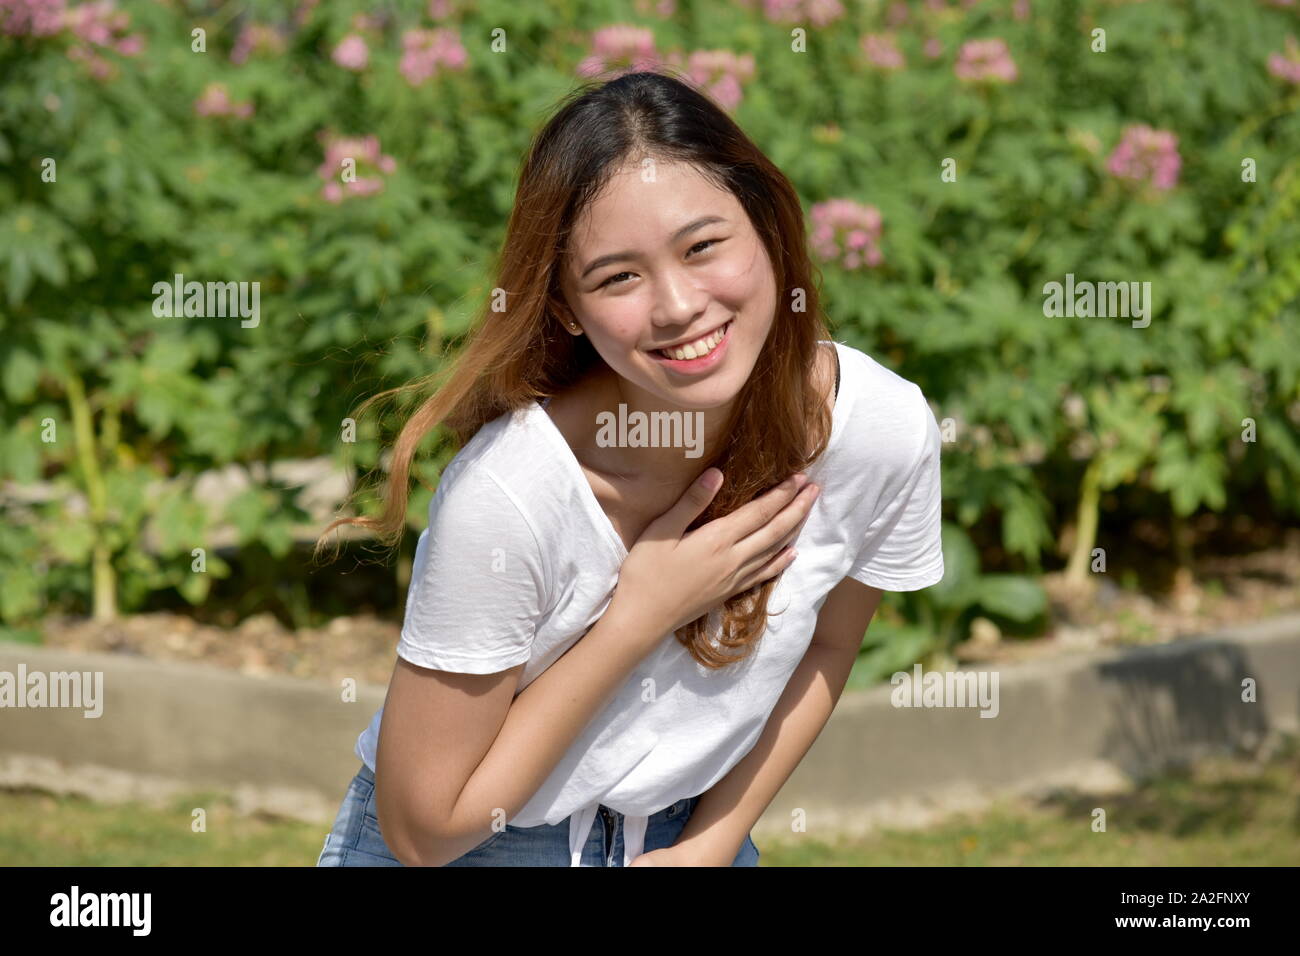 An Attractive Diverse Female Laughing Stock Photo